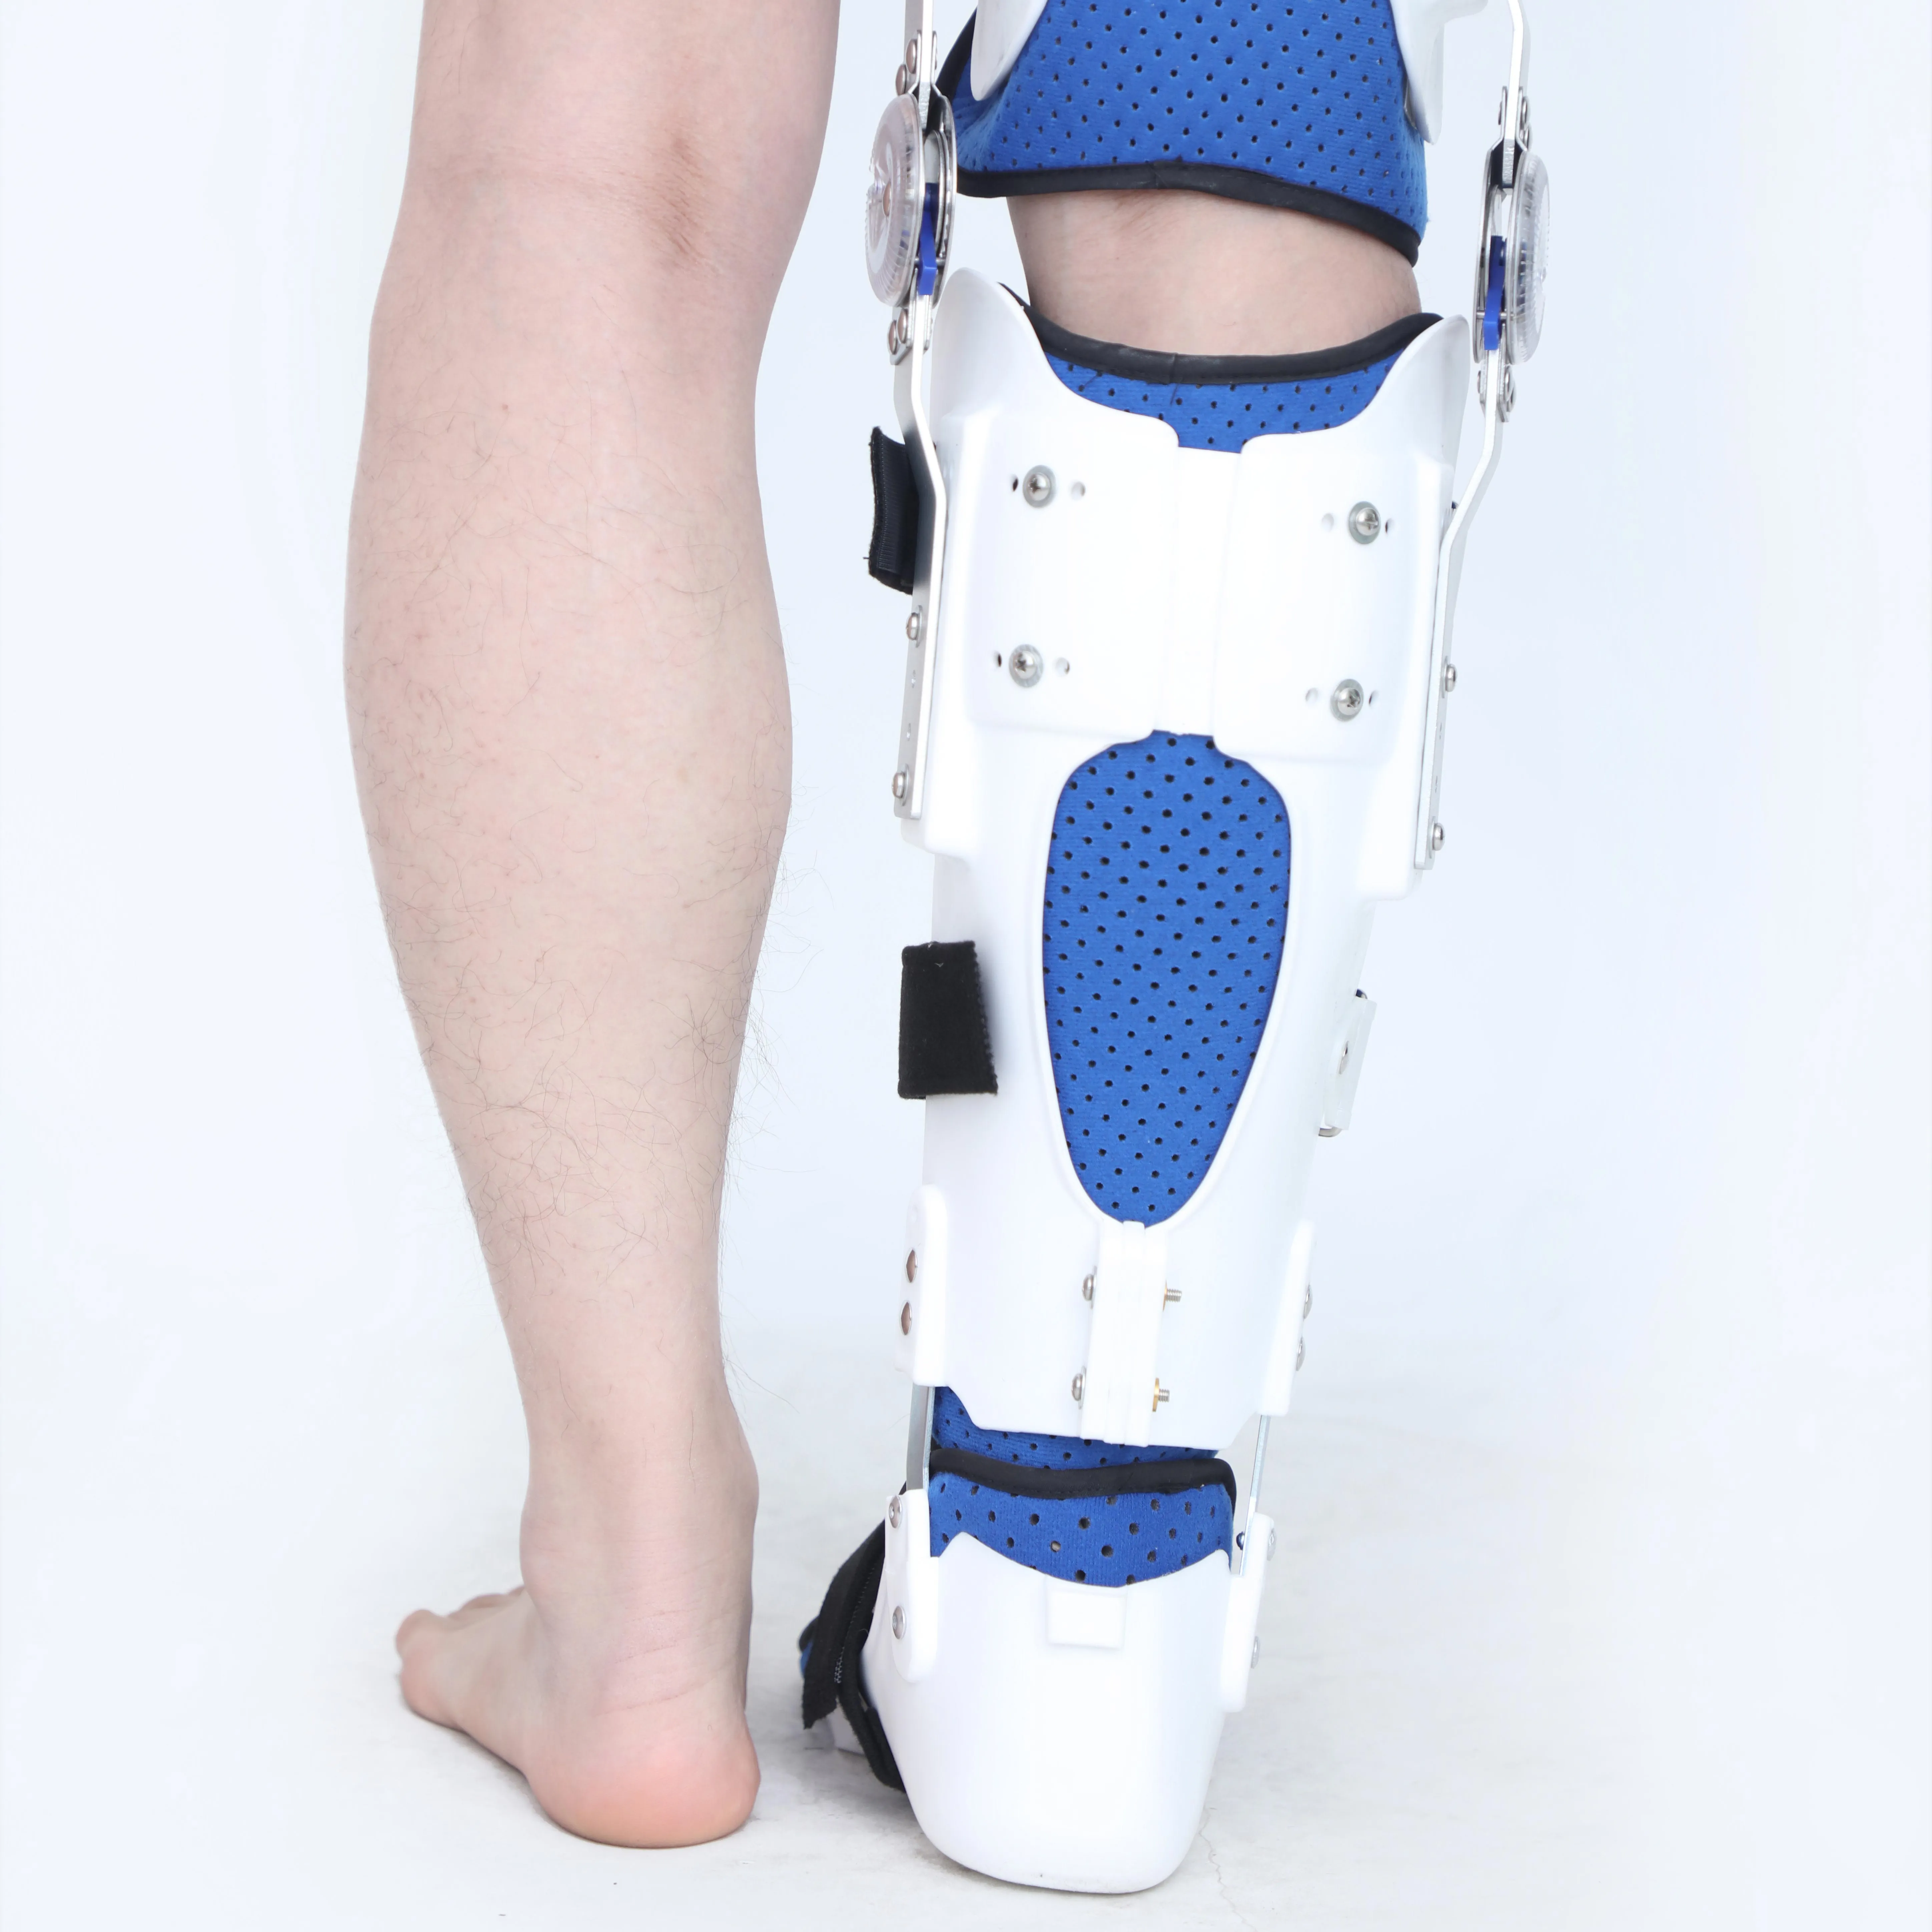 High quality OrthoCare Medical free size Left/Right 10 degree Knee Ankle Foot Orthosis fixed recovery period after operation